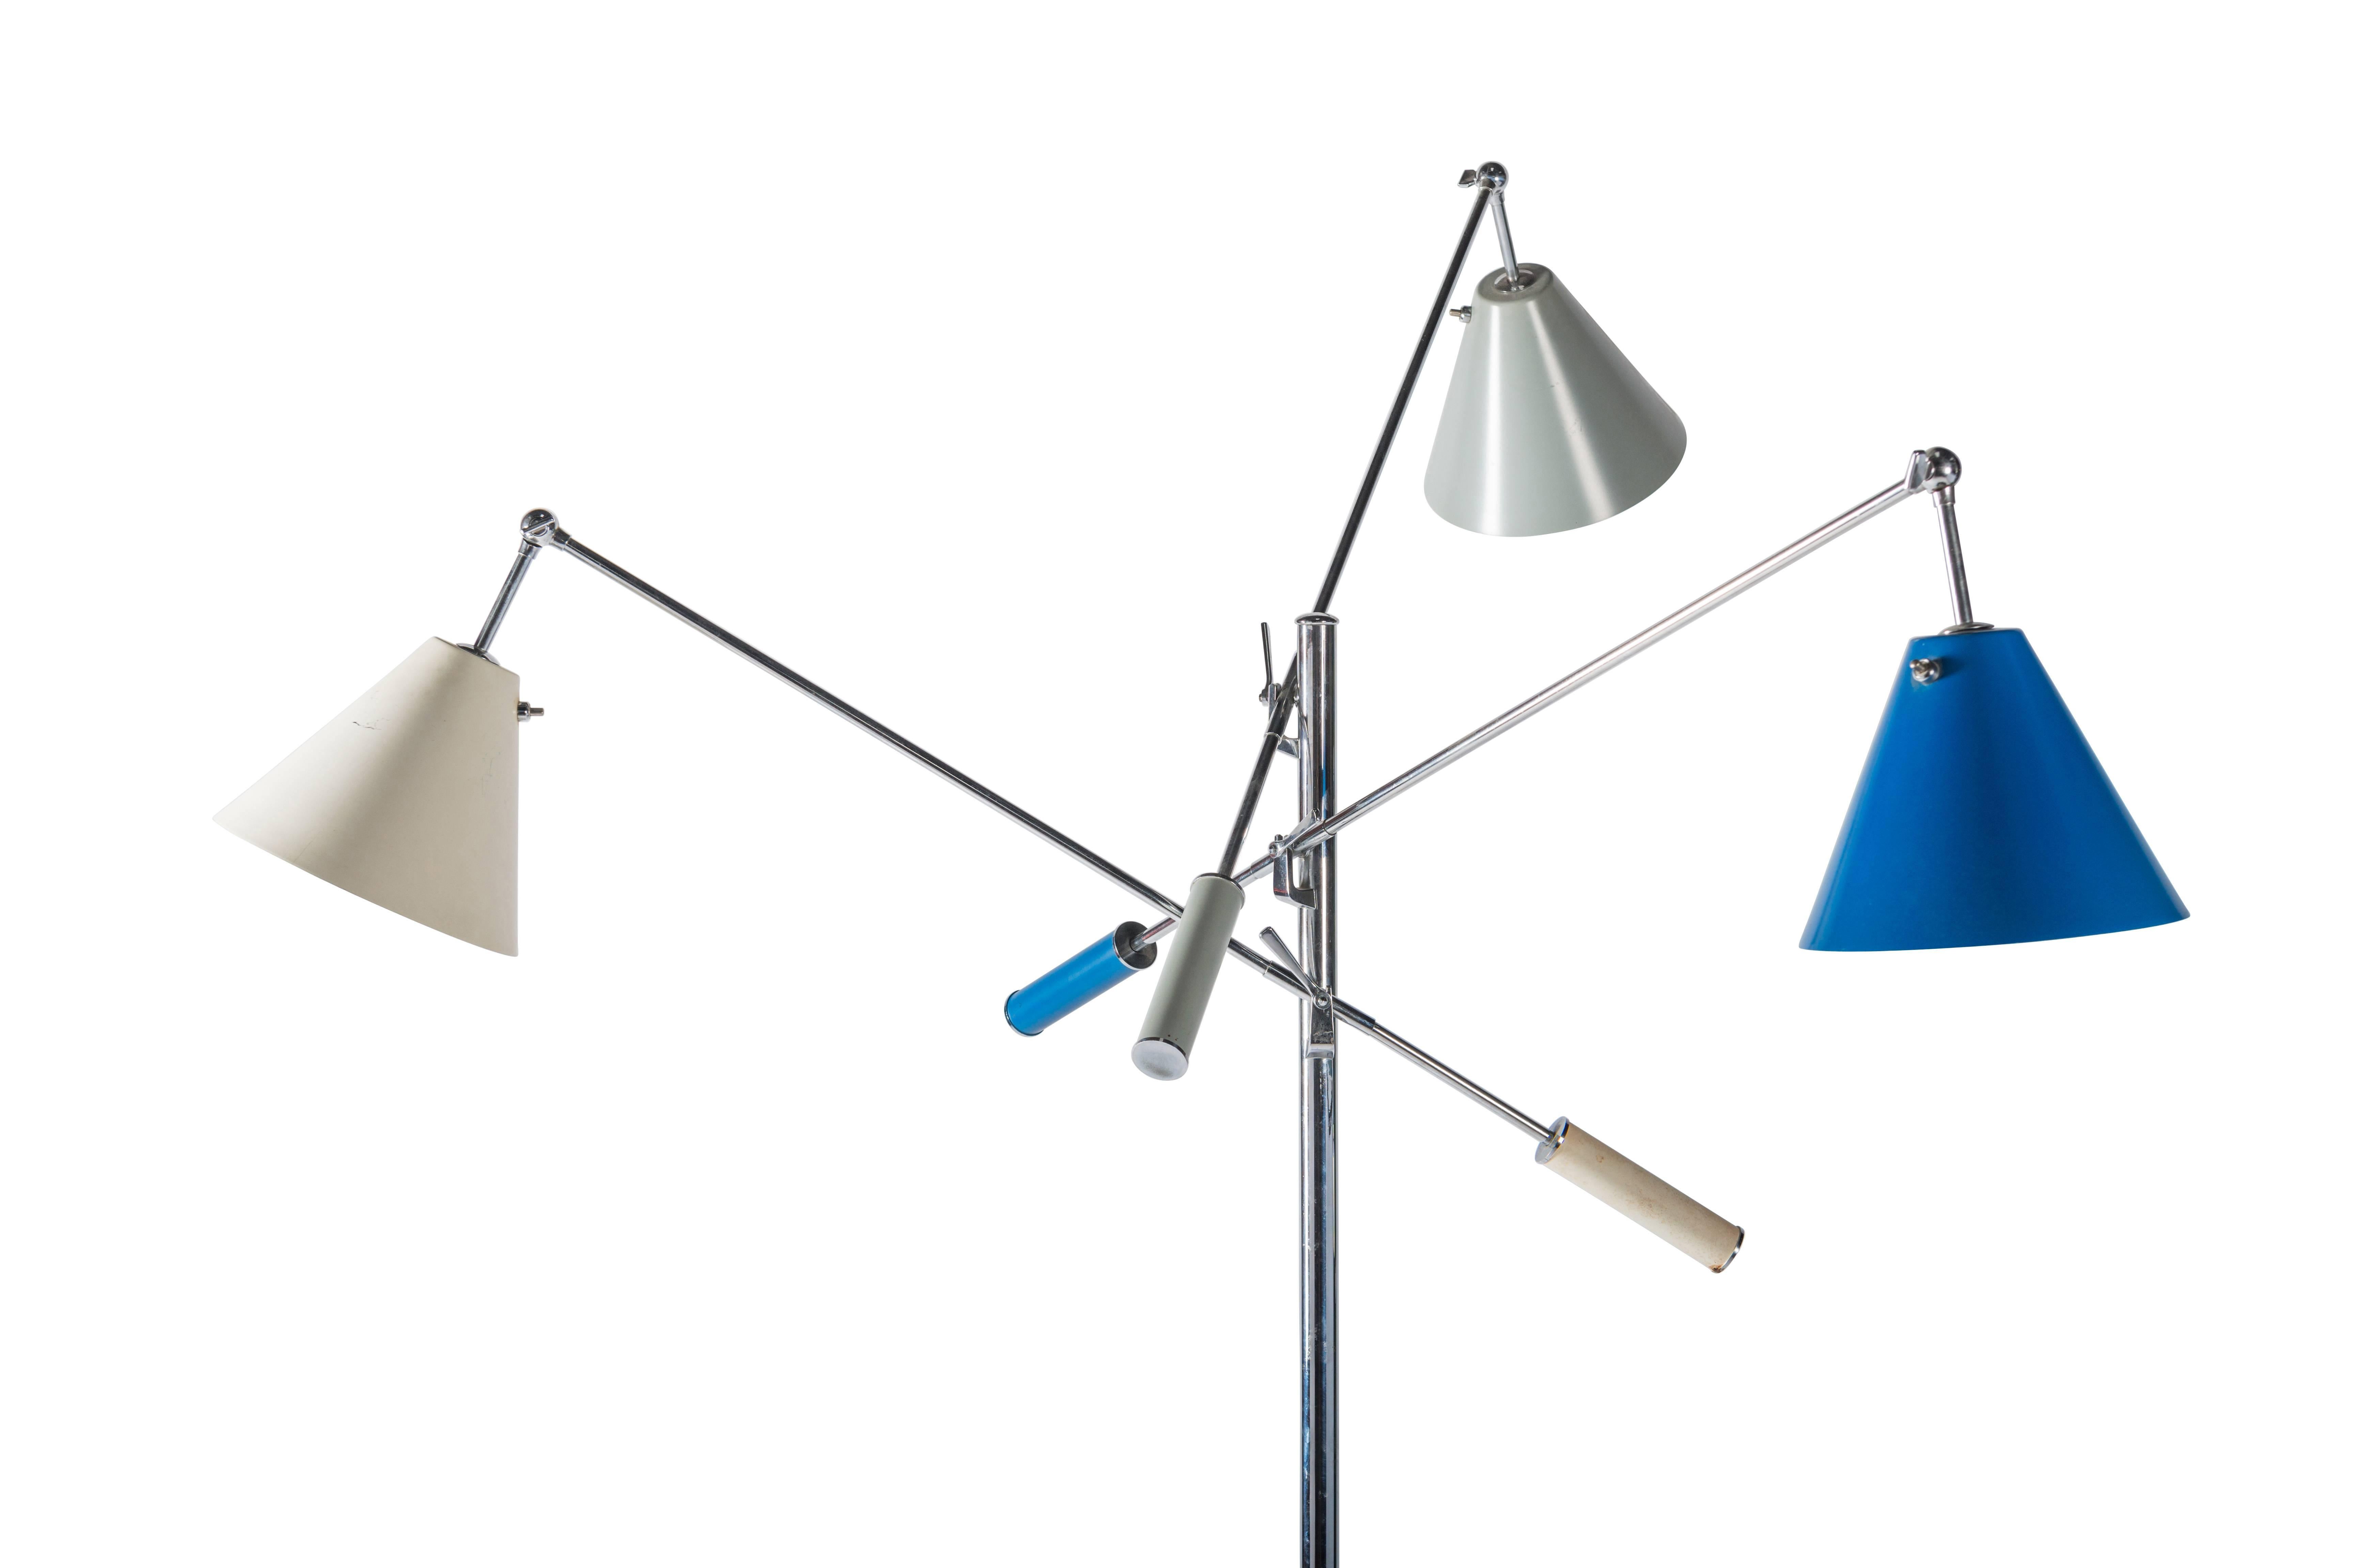 Early chrome Triennale floor lamp by Angelo Lelli for Arredolce, Italy, circa 1958. Original painted white, grey and blue shades and handles. Marked 